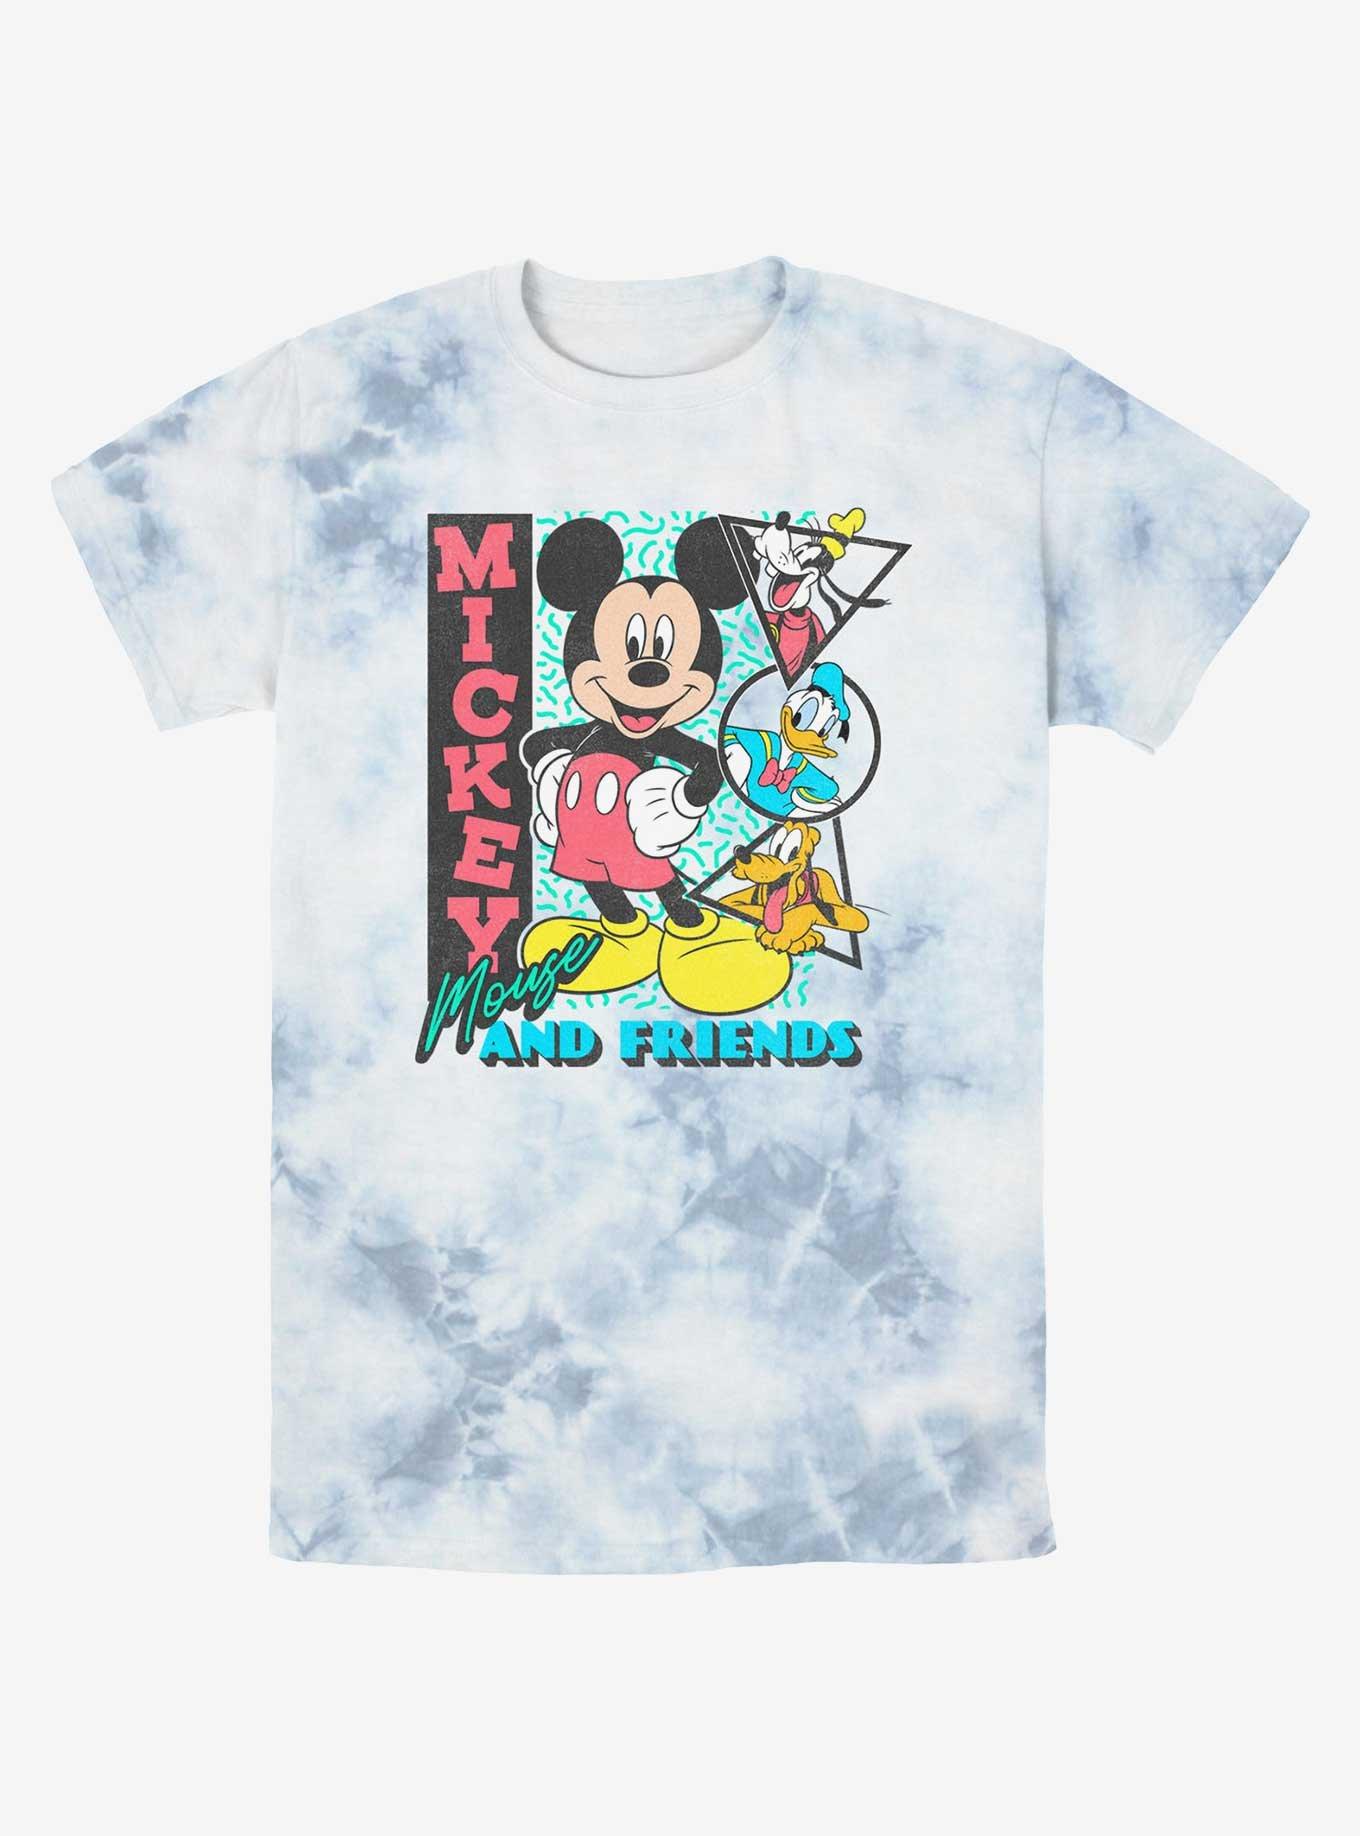 Disney Mickey Mouse Friends Goofy Donald and Pluto Tie-Dye T-Shirt